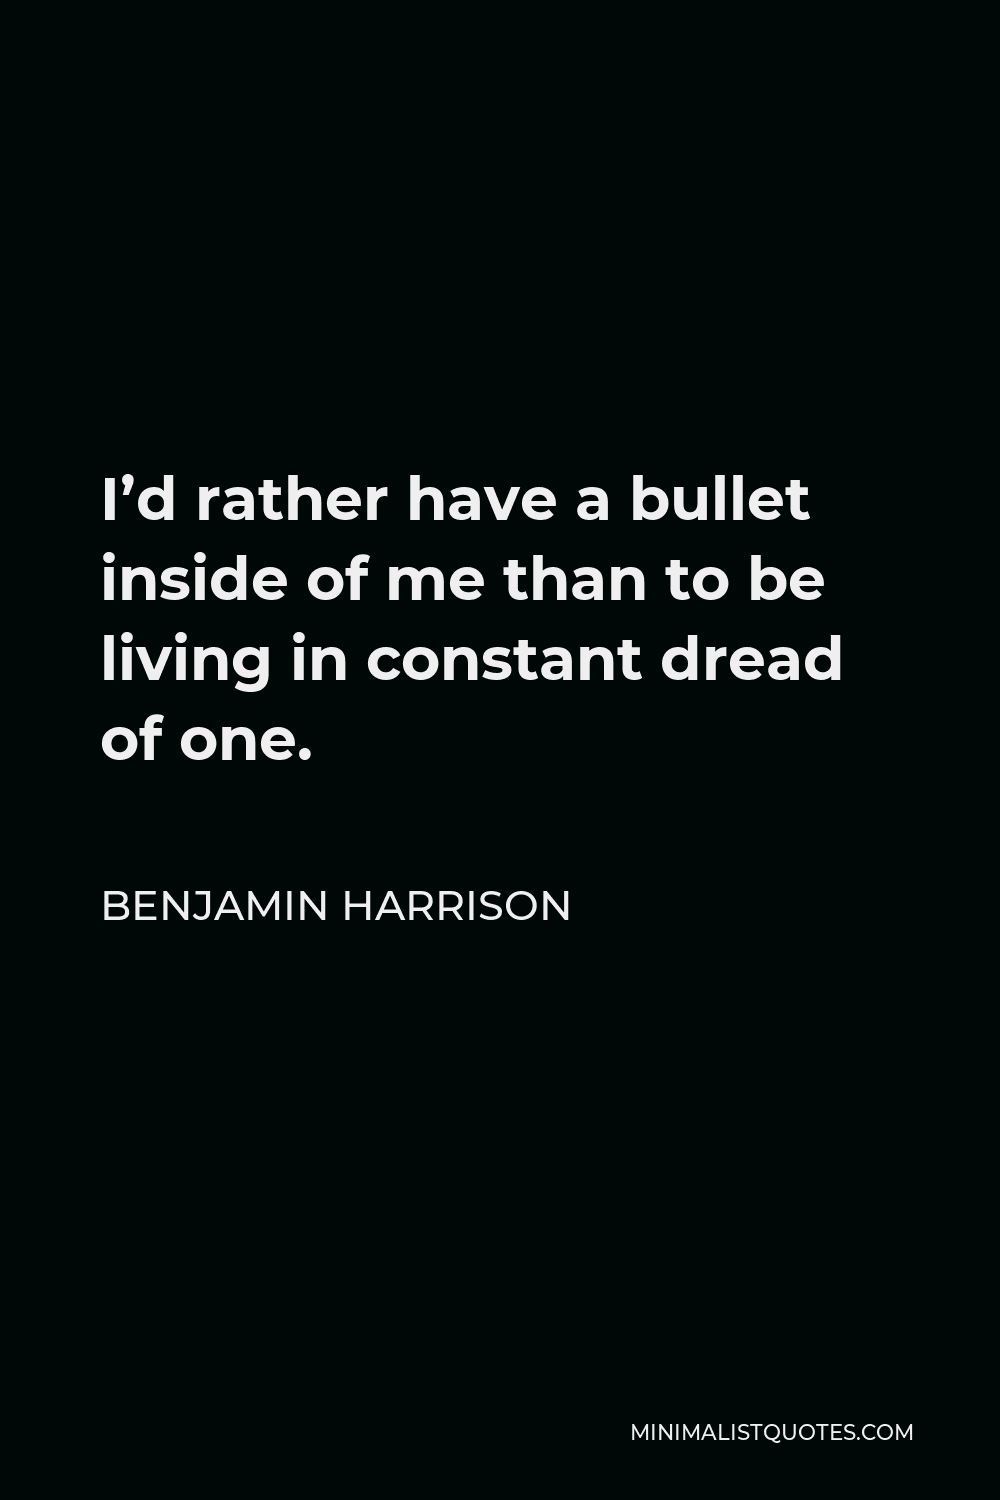 Benjamin Harrison Quote - I’d rather have a bullet inside of me than to be living in constant dread of one.